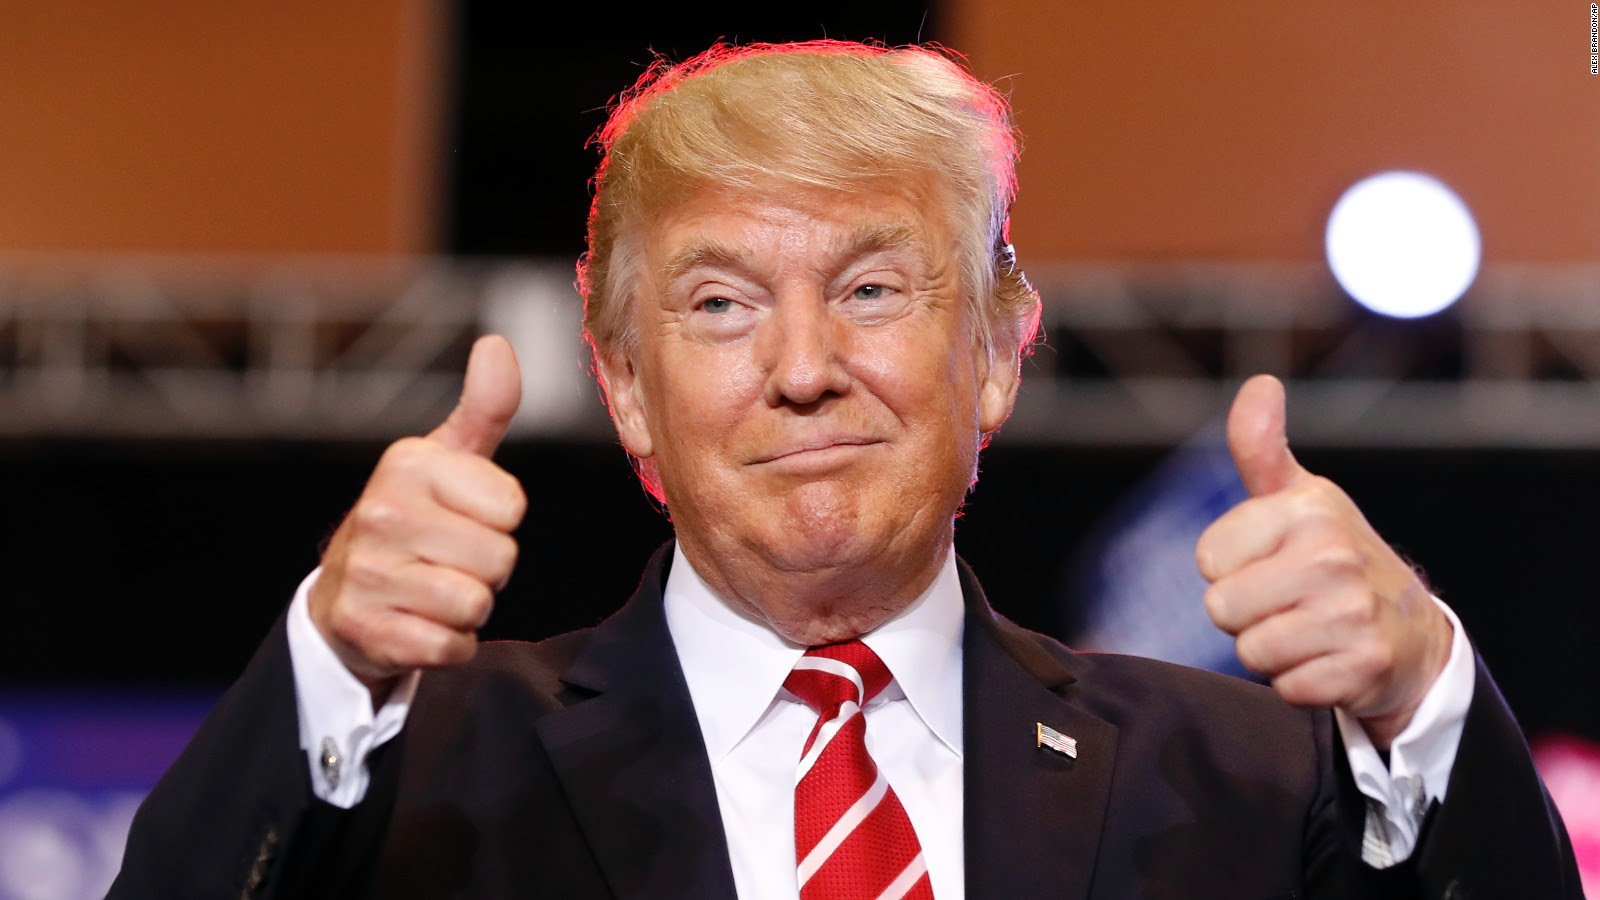 Picture of Donald Trump with two thumbs up.